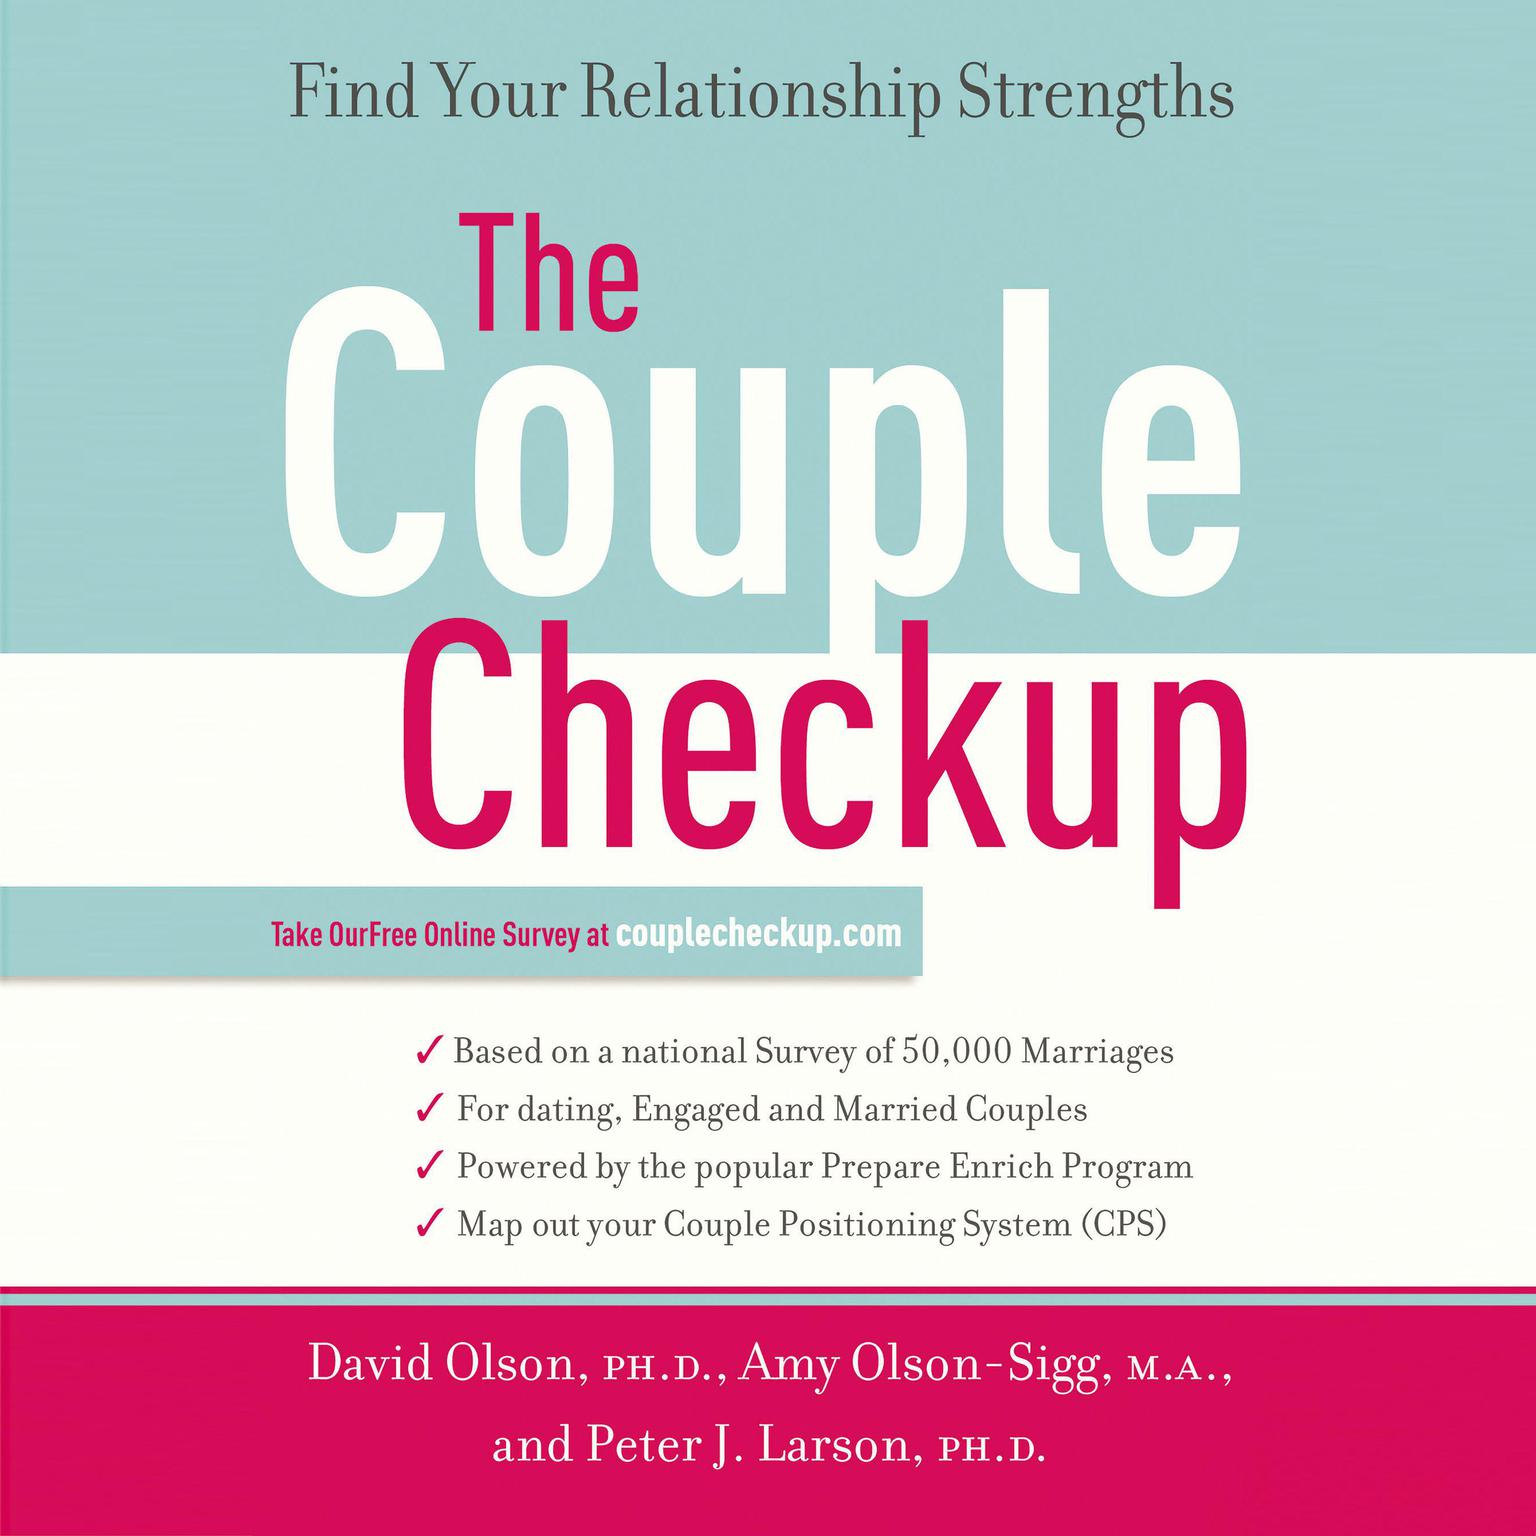 The Couple Checkup: Find Your Relationship Strengths Audiobook, by David H. Olson